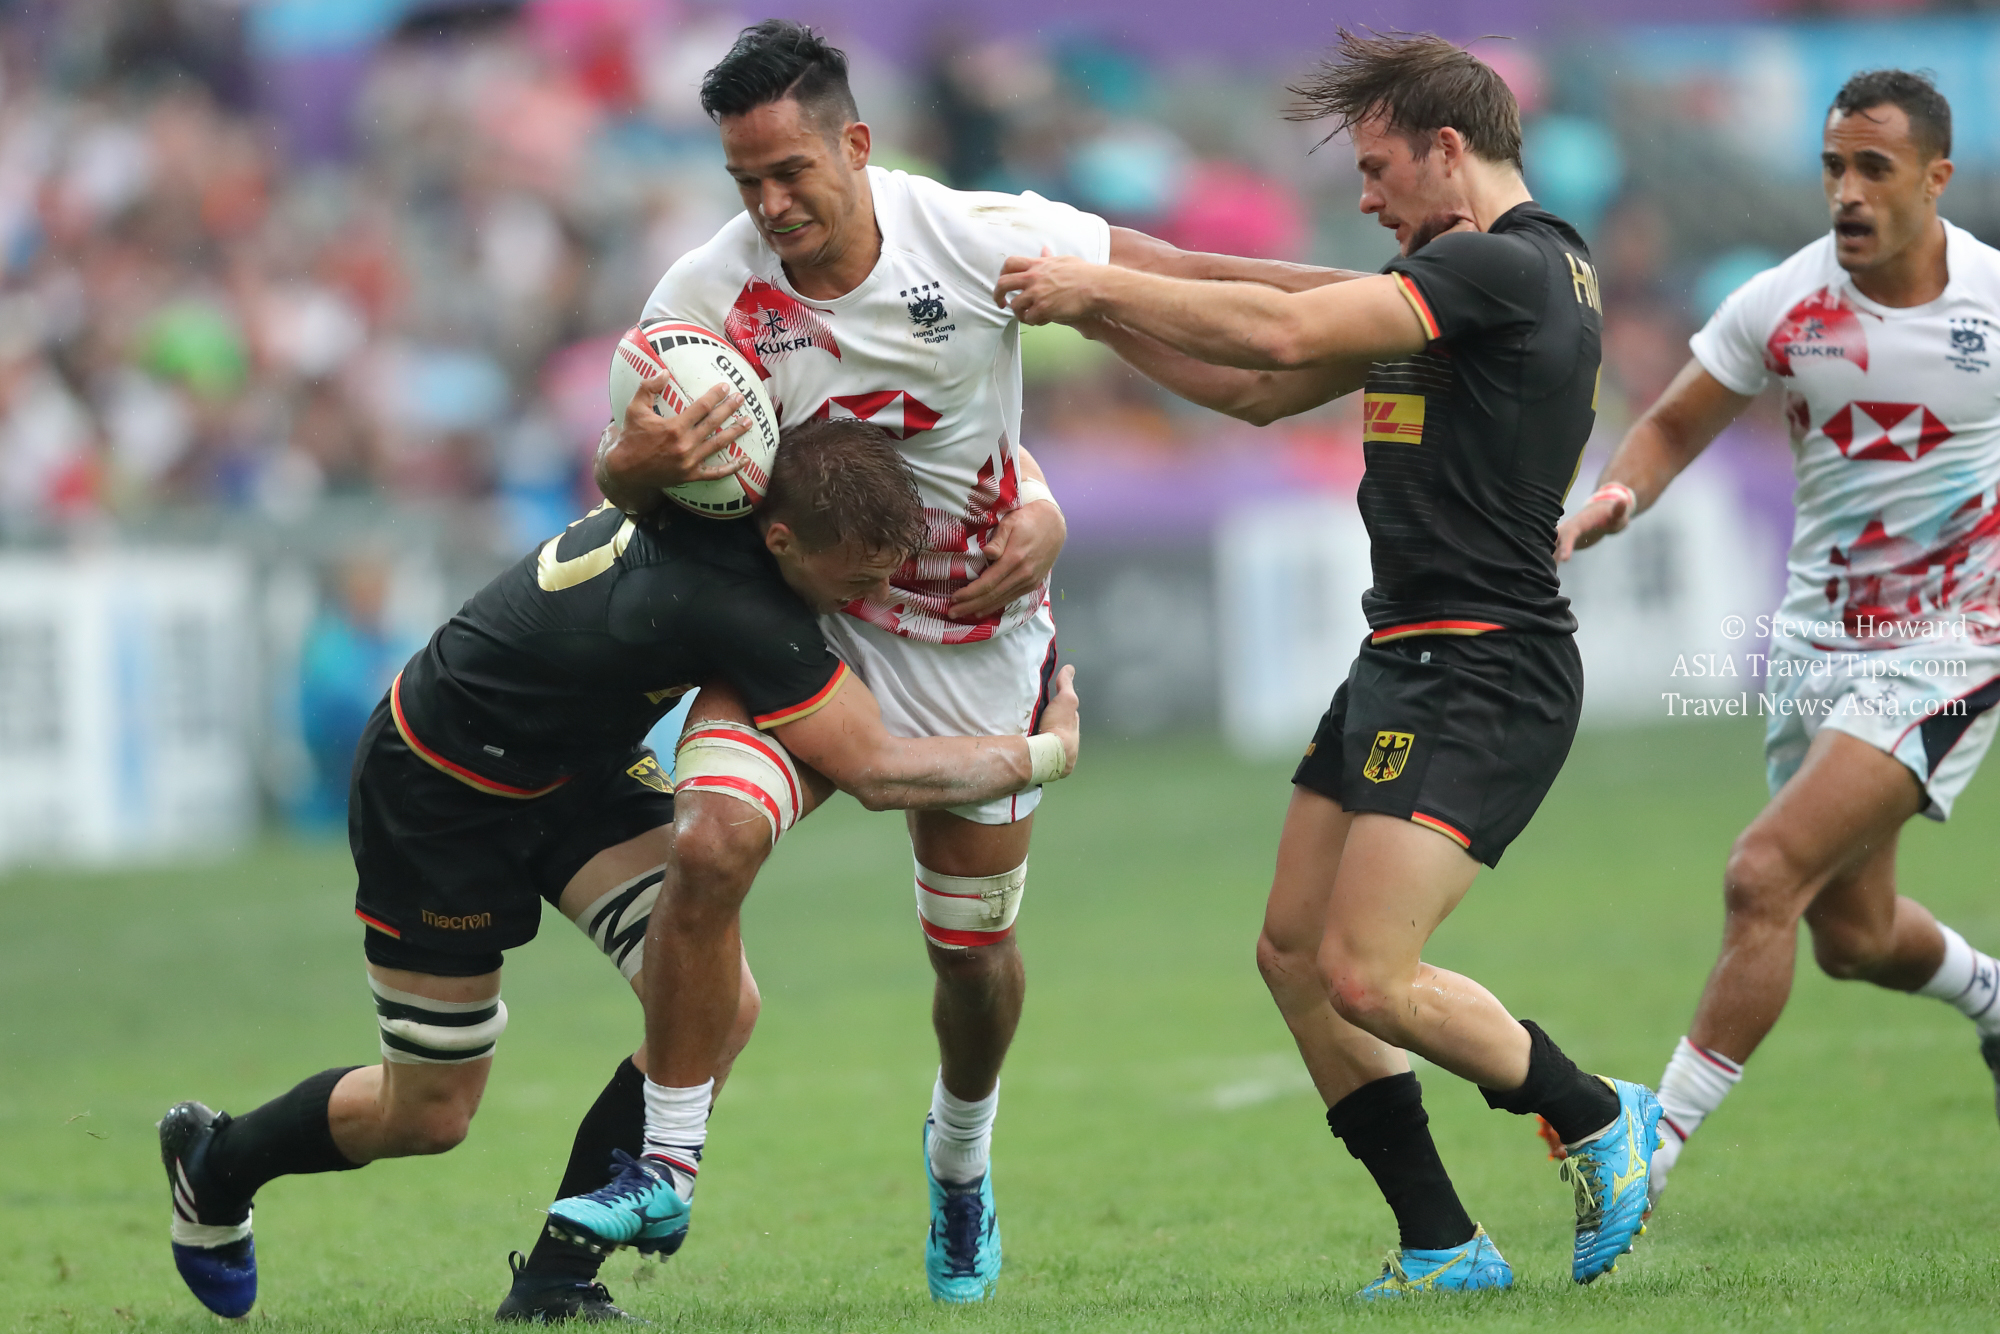 Hong Kong in action against Germany in the 2018 Cathay Pacific / HSBC Hong Kong Sevens. Picture by Steven Howard of TravelNewsAsia.com Click to enlarge.